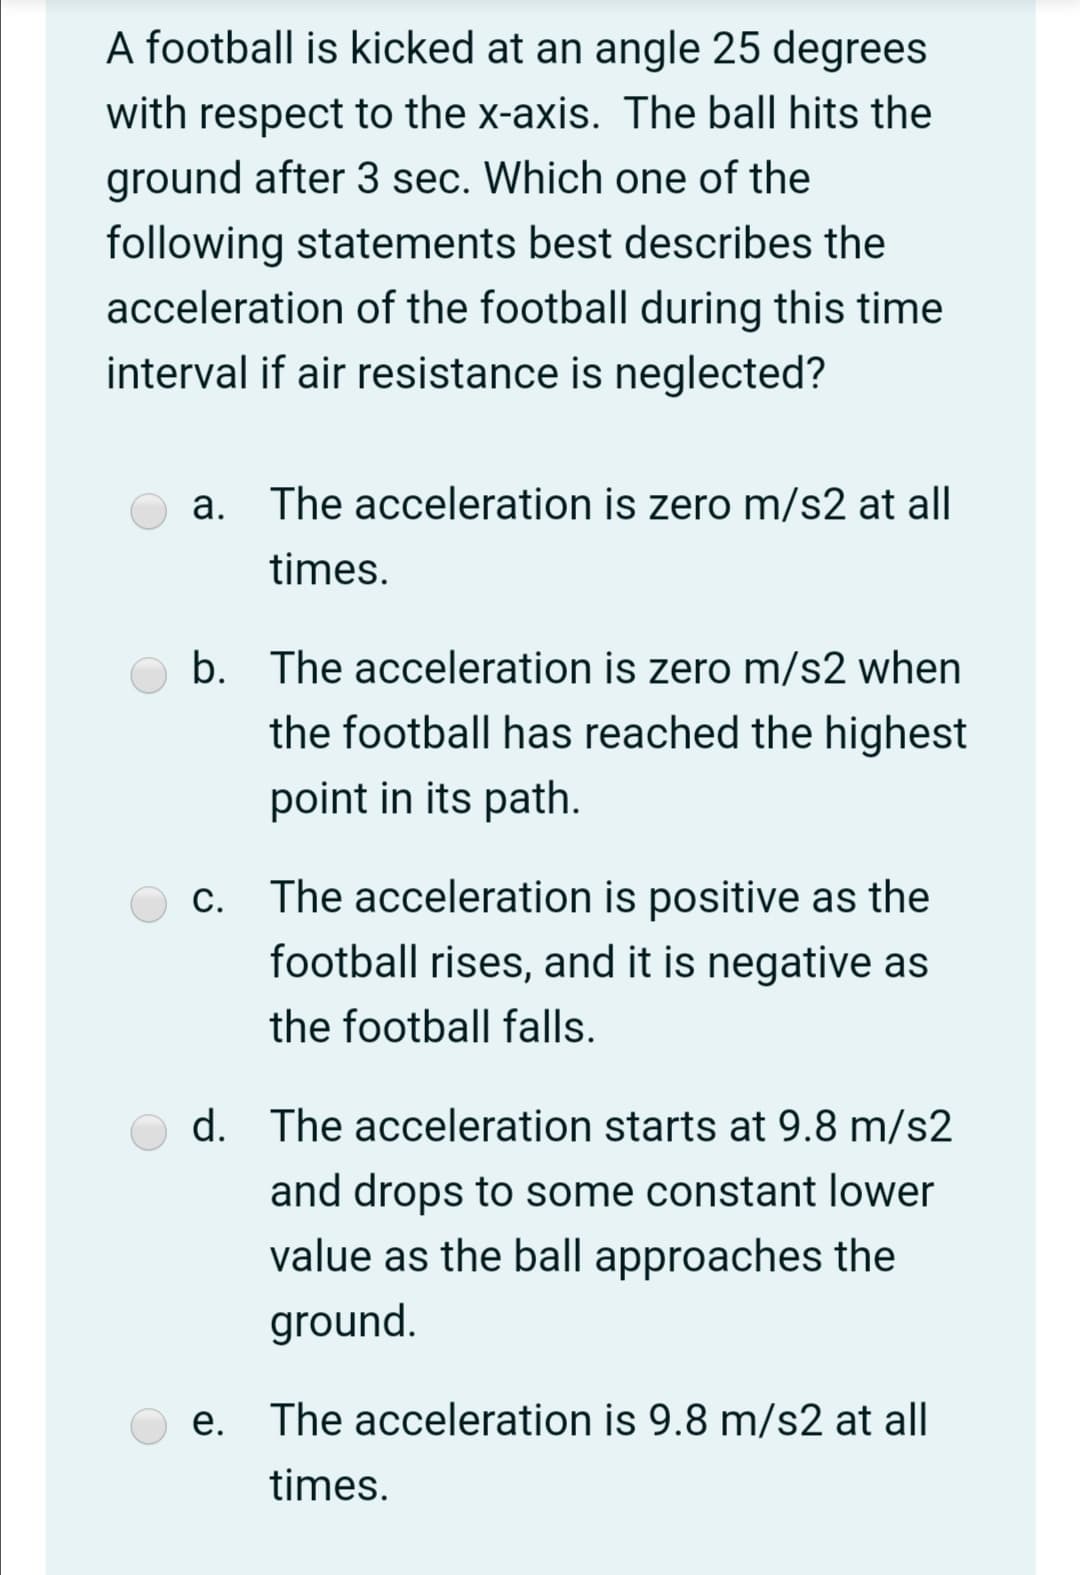 A football is kicked at an angle 25 degrees
with respect to the x-axis. The ball hits the
ground after 3 sec. Which one of the
following statements best describes the
acceleration of the football during this time
interval if air resistance is neglected?
a. The acceleration is zero m/s2 at all
times.
b. The acceleration is zero m/s2 when
the football has reached the highest
point in its path.
c. The acceleration is positive as the
football rises, and it is negative as
the football falls.
d. The acceleration starts at 9.8 m/s2
and drops to some constant lower
value as the ball approaches the
ground.
e. The acceleration is 9.8 m/s2 at all
times.
